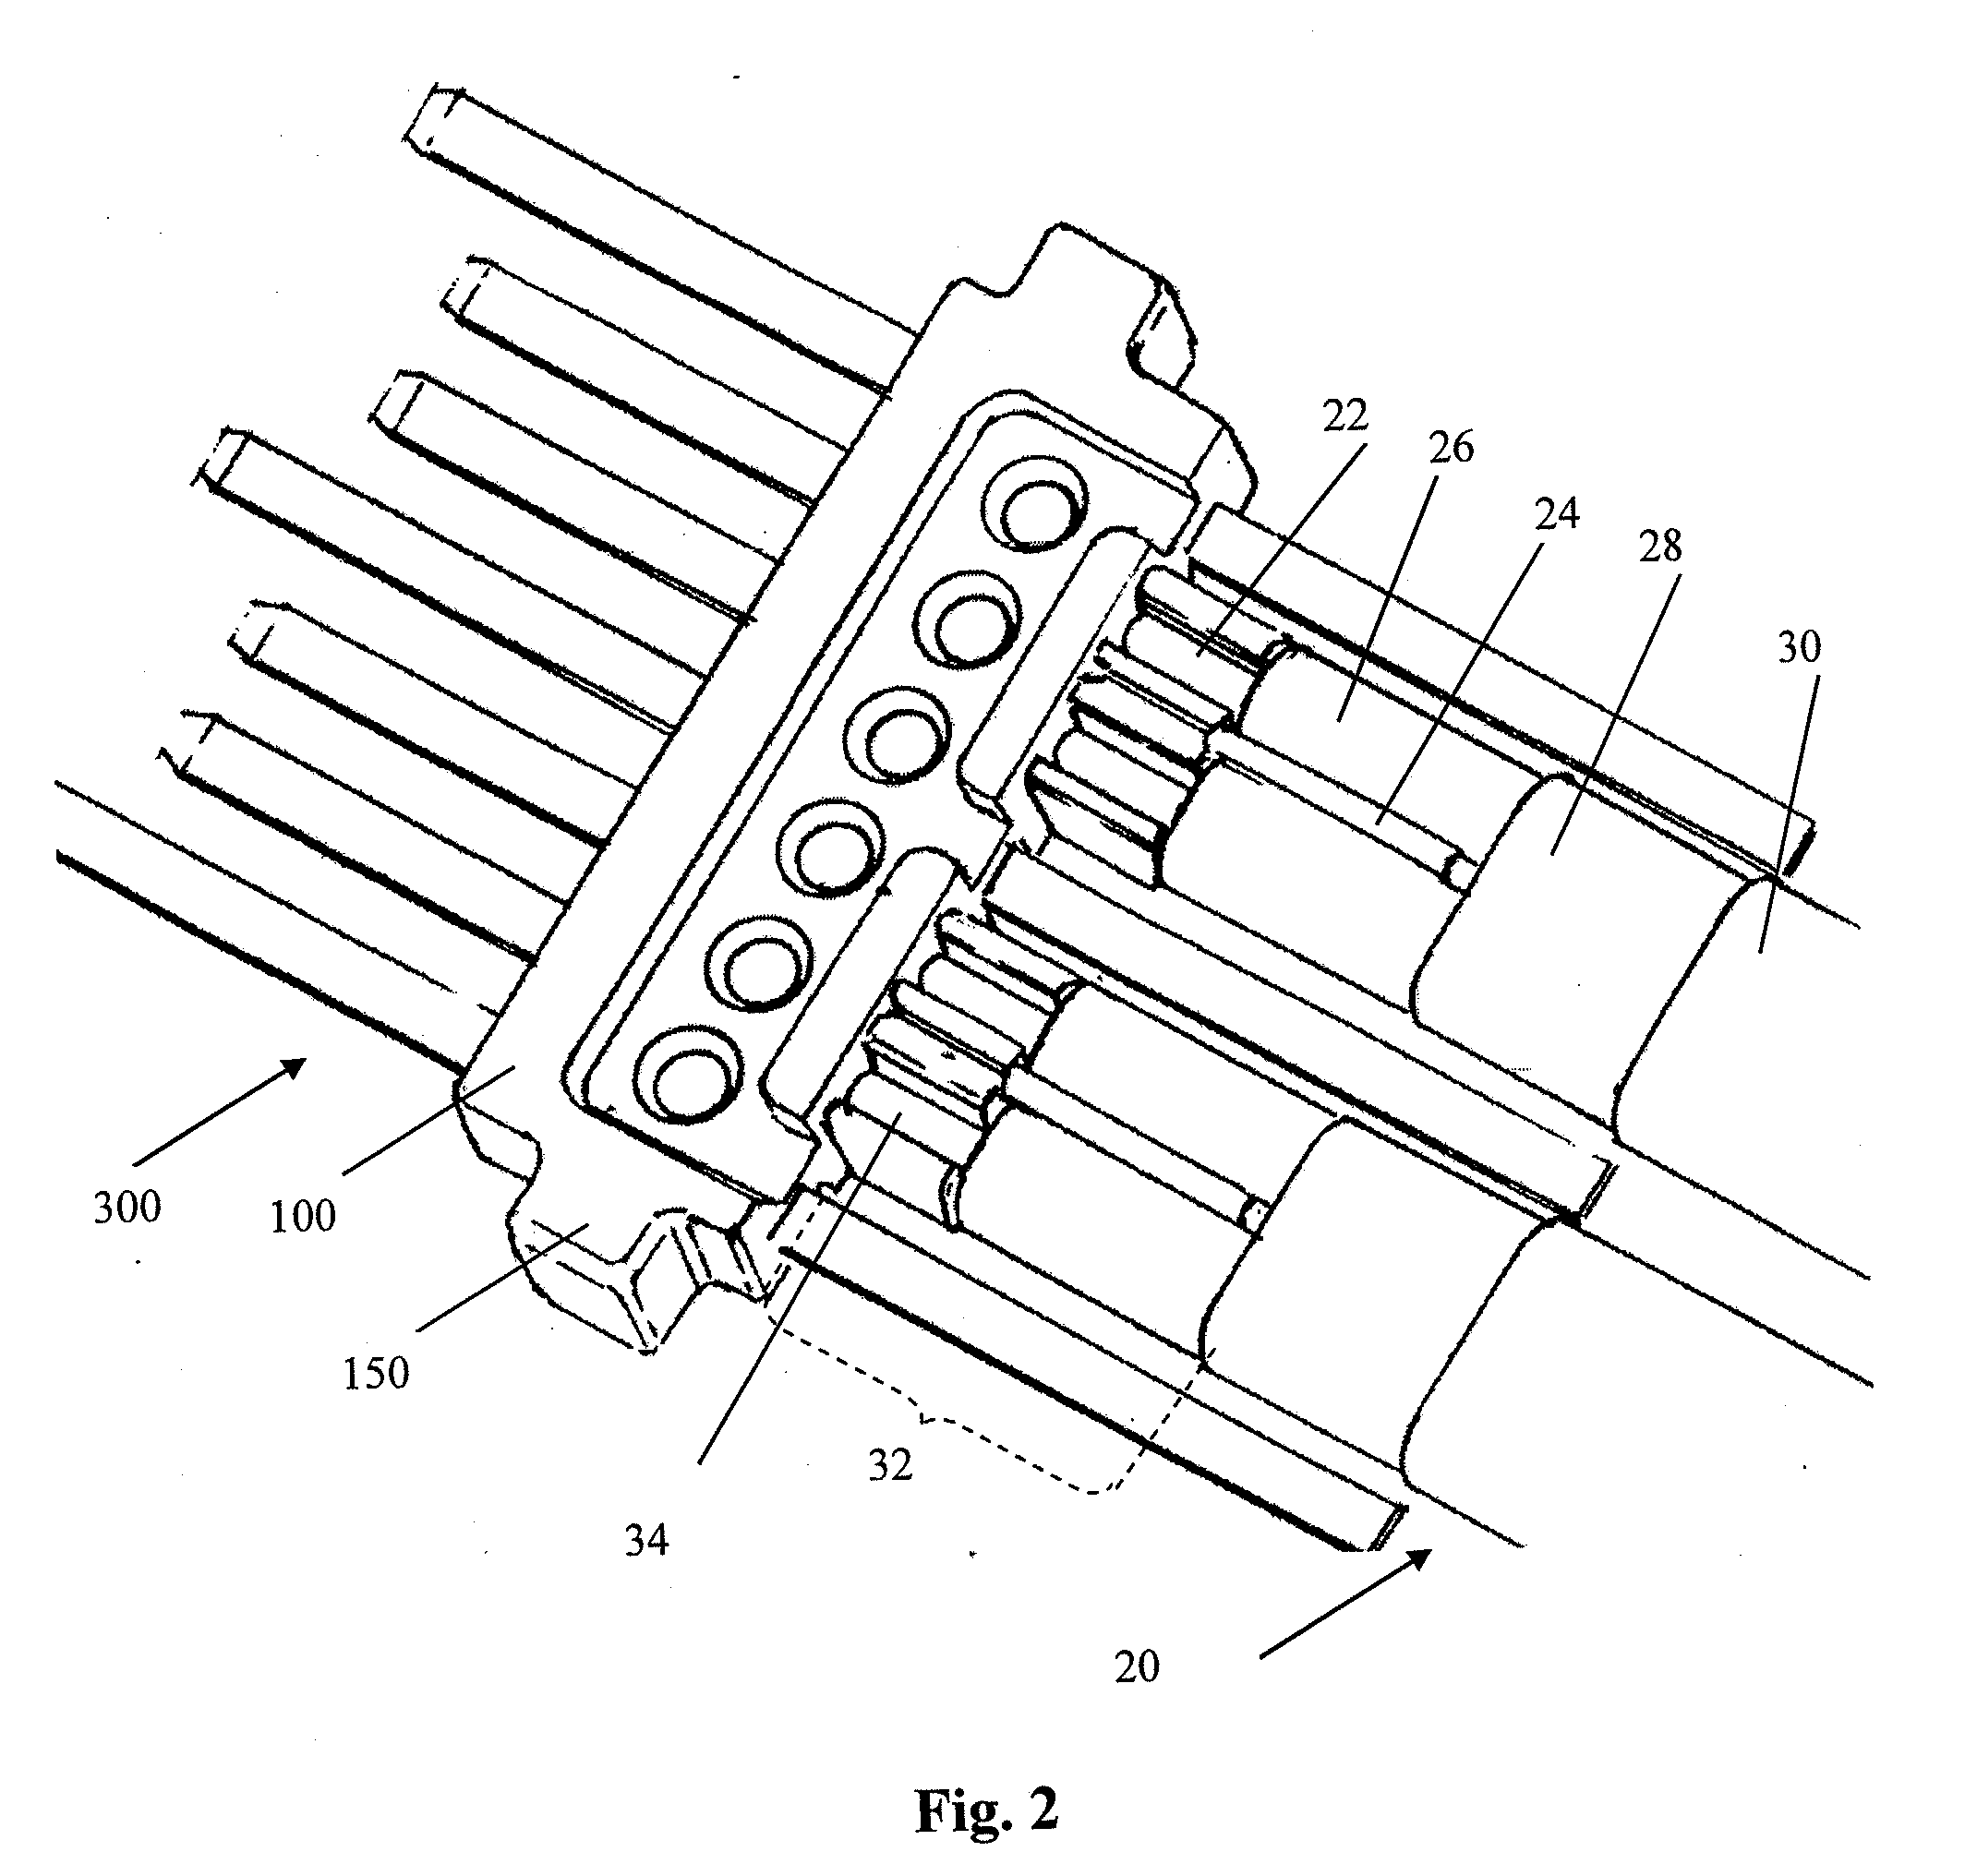 Ground sleeve having improved impedance control and high frequency performance